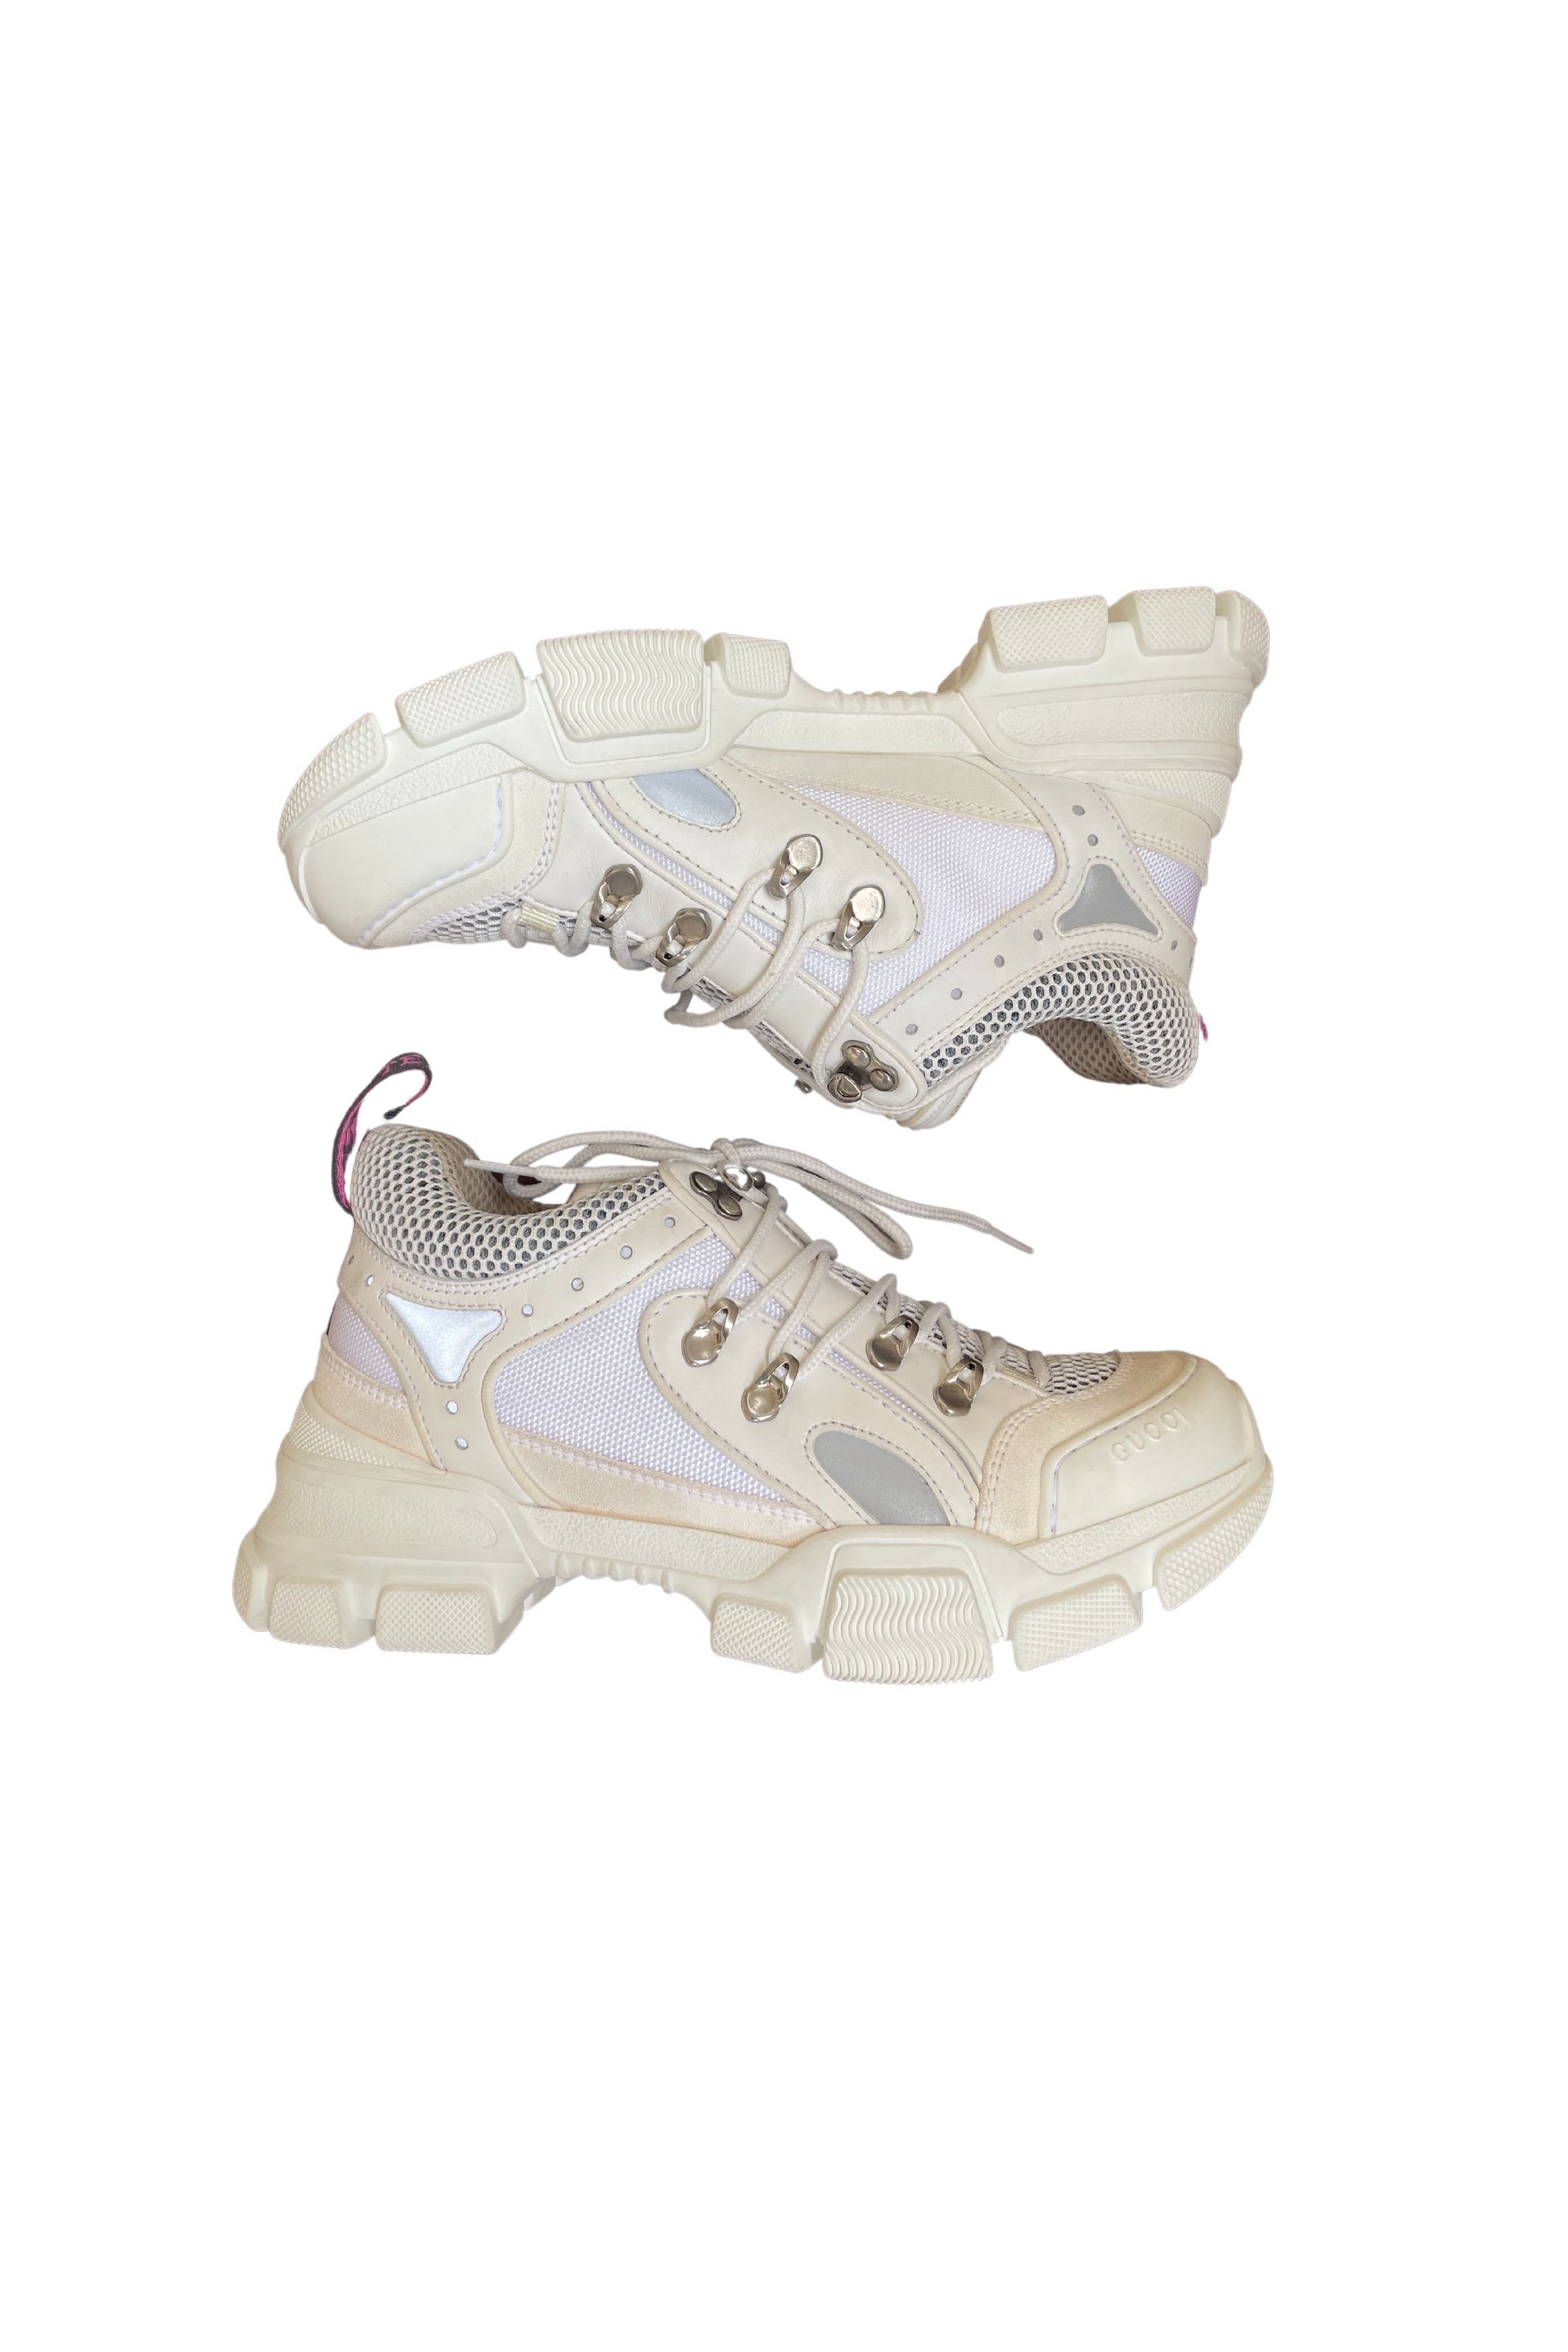 Gucci Flashtrek Sneakers SEGA White G 37 – Curated by Charbel